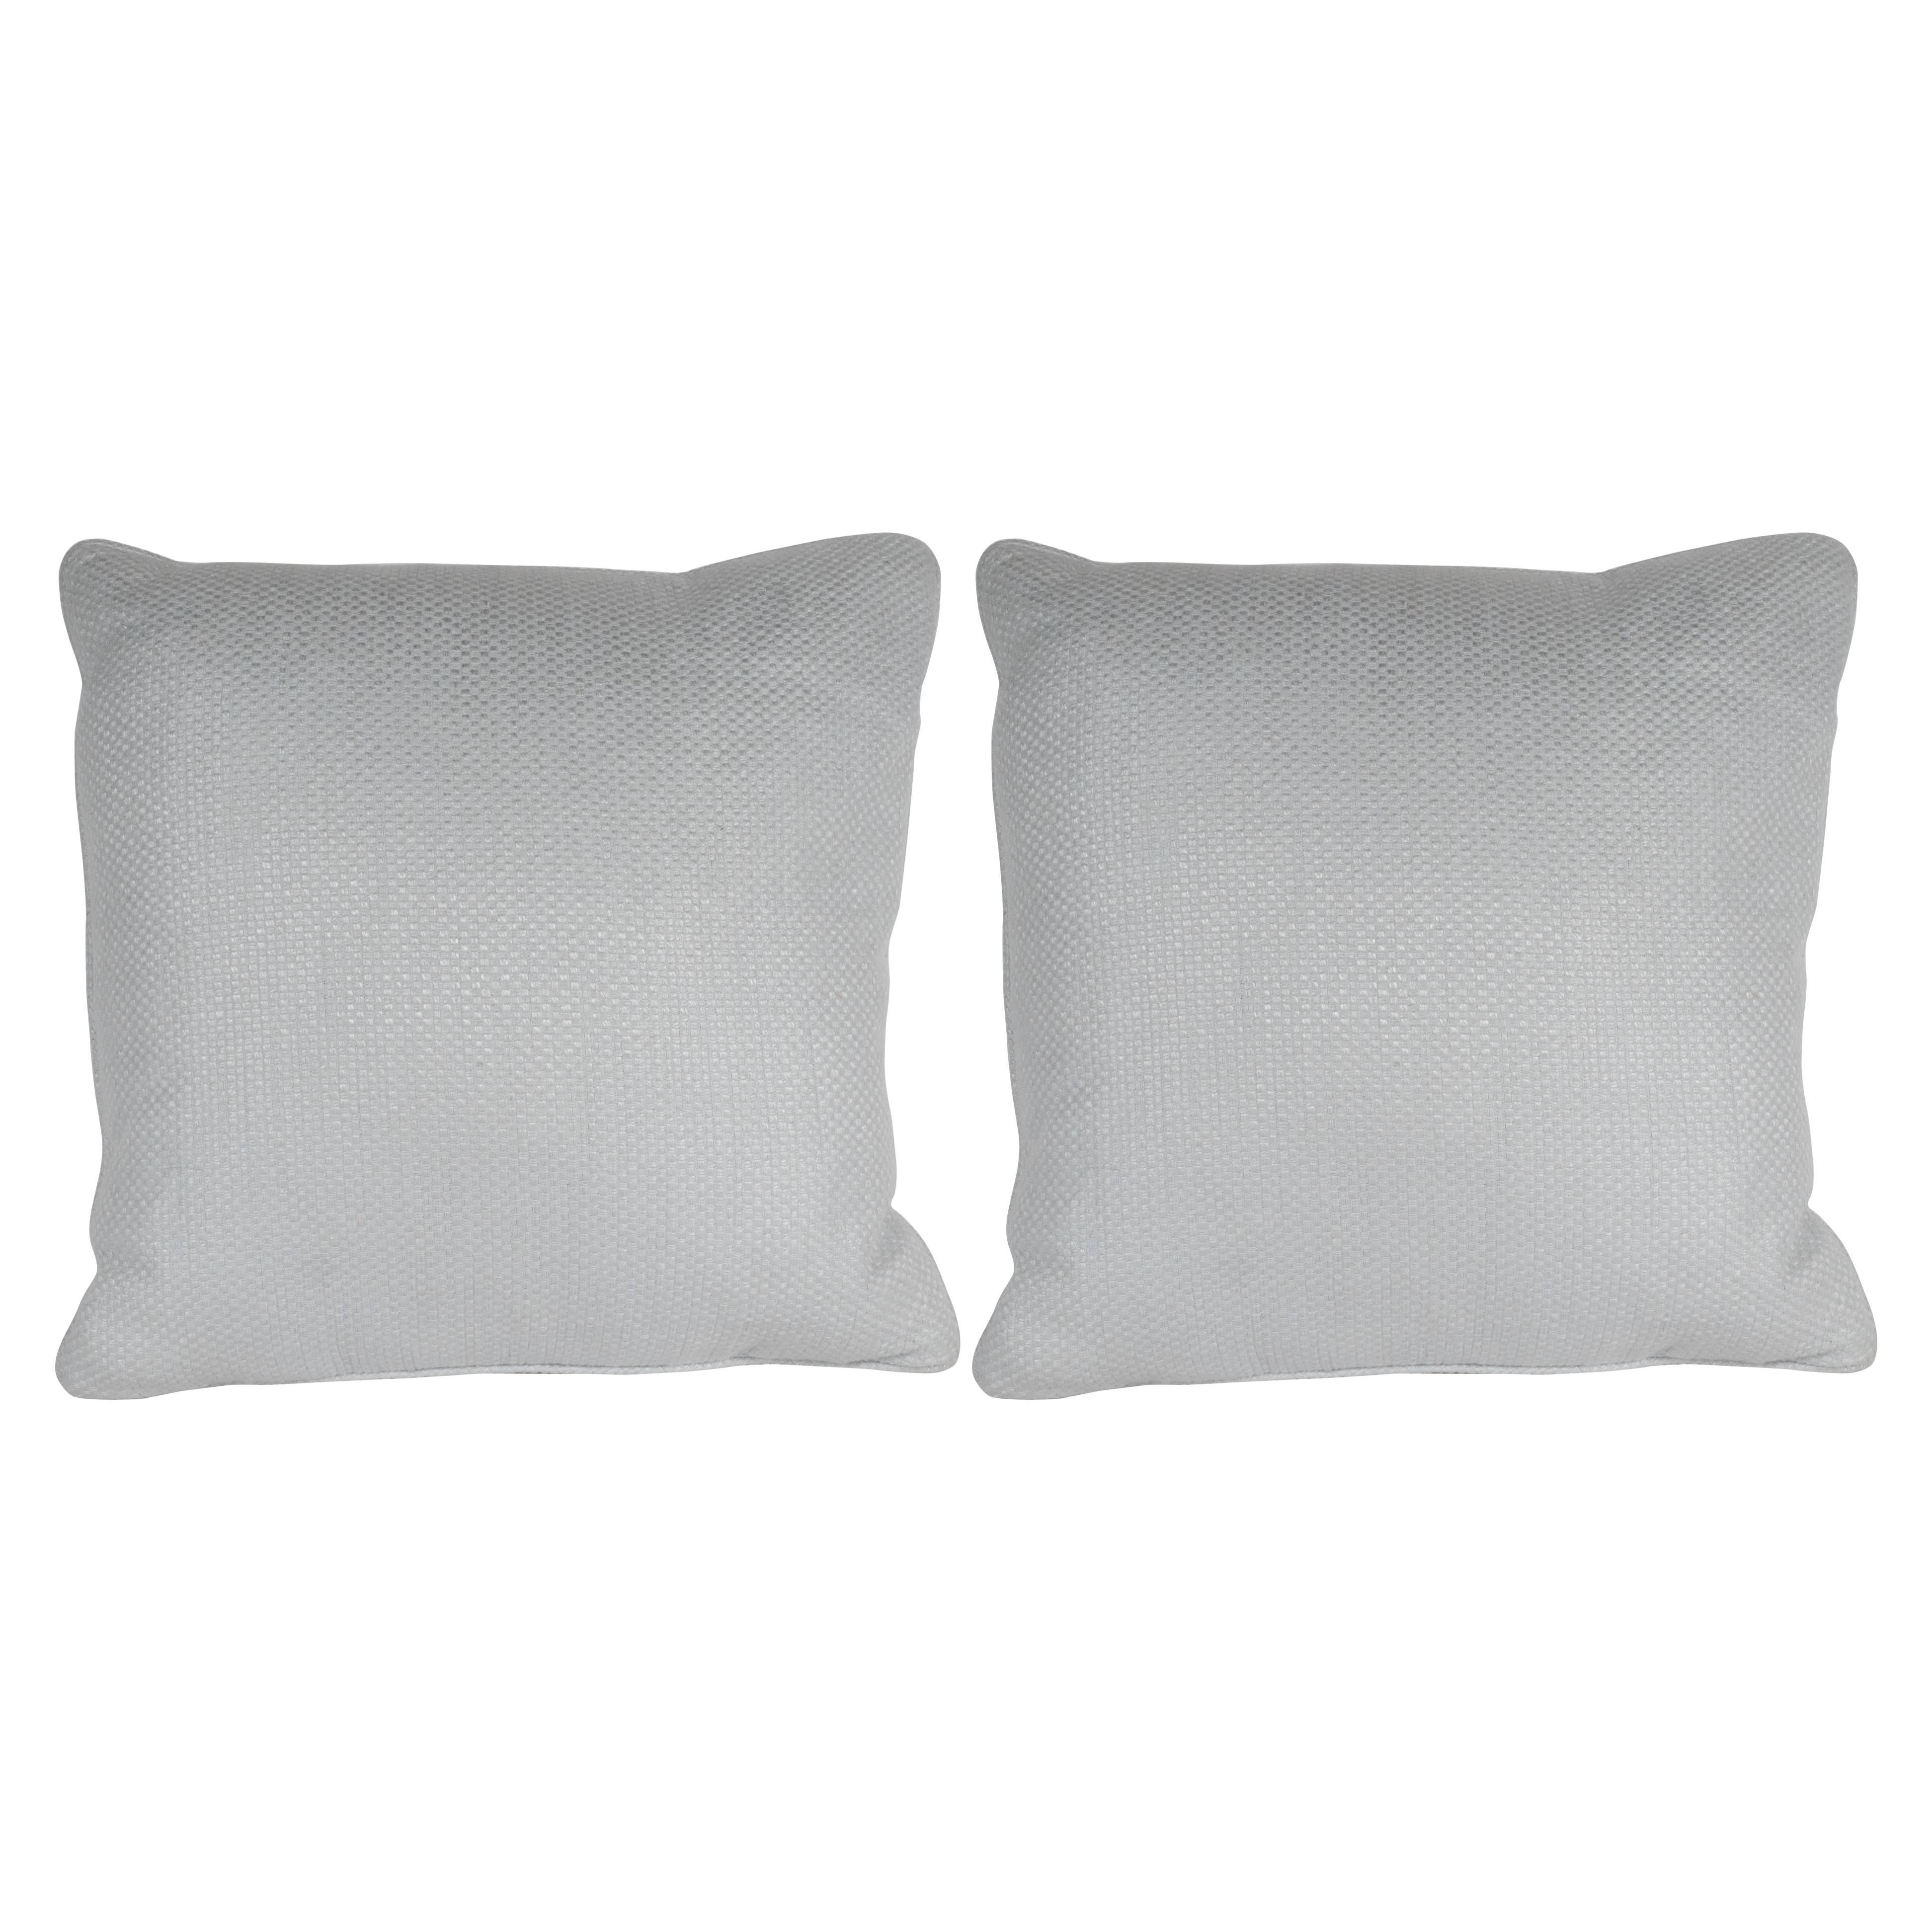 Pair of Square Pillows in Patterned White Gold Italian Handwoven Silk